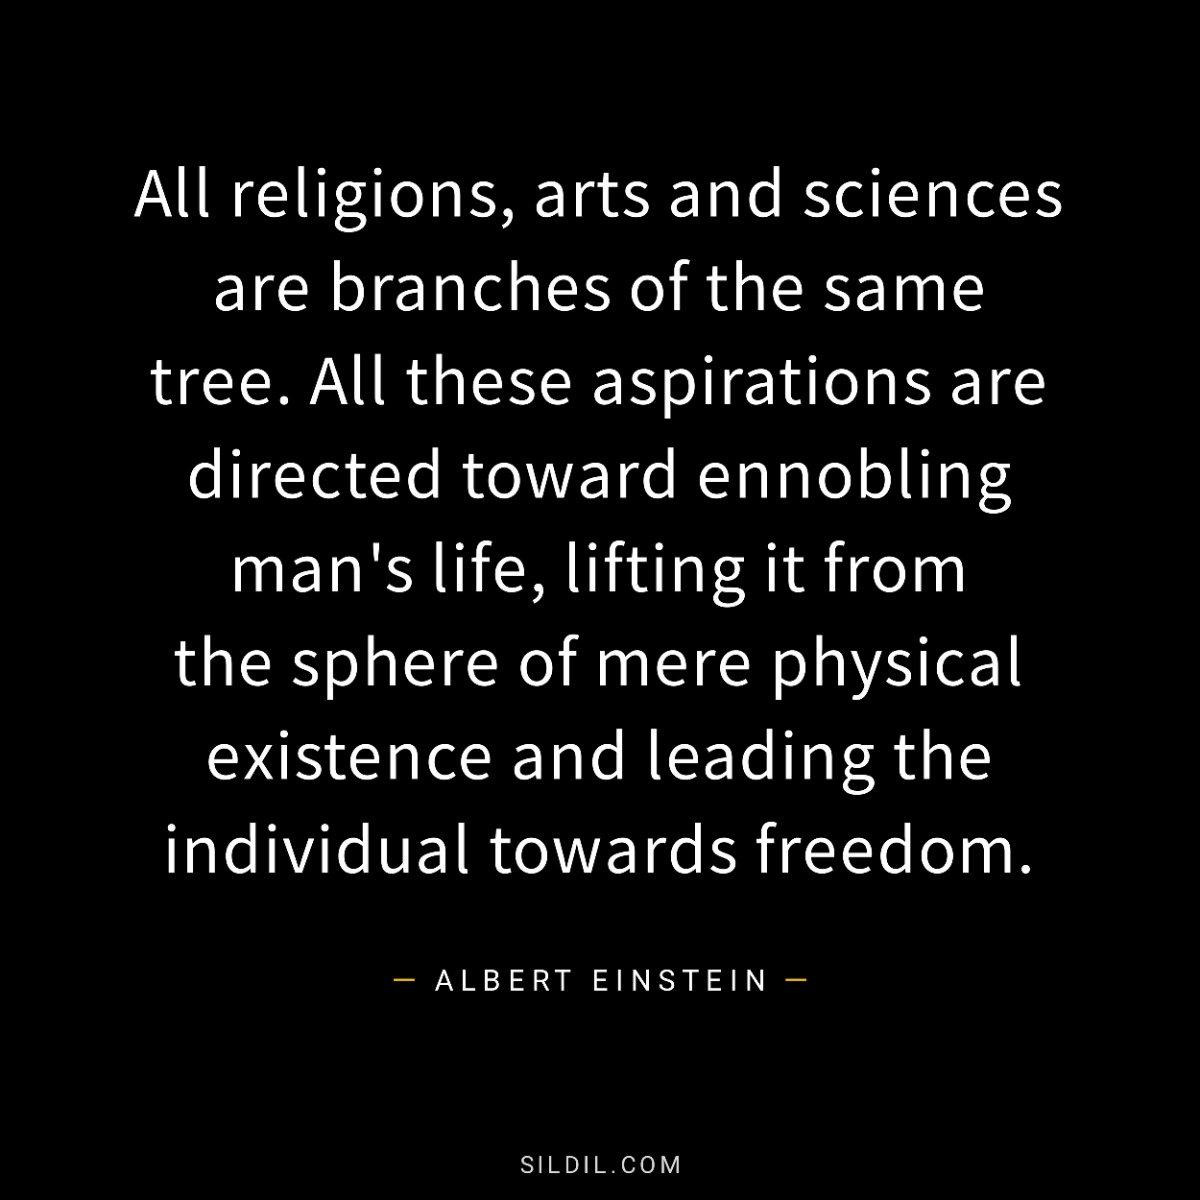 All religions, arts and sciences are branches of the same tree. All these aspirations are directed toward ennobling man's life, lifting it from the sphere of mere physical existence and leading the individual towards freedom.